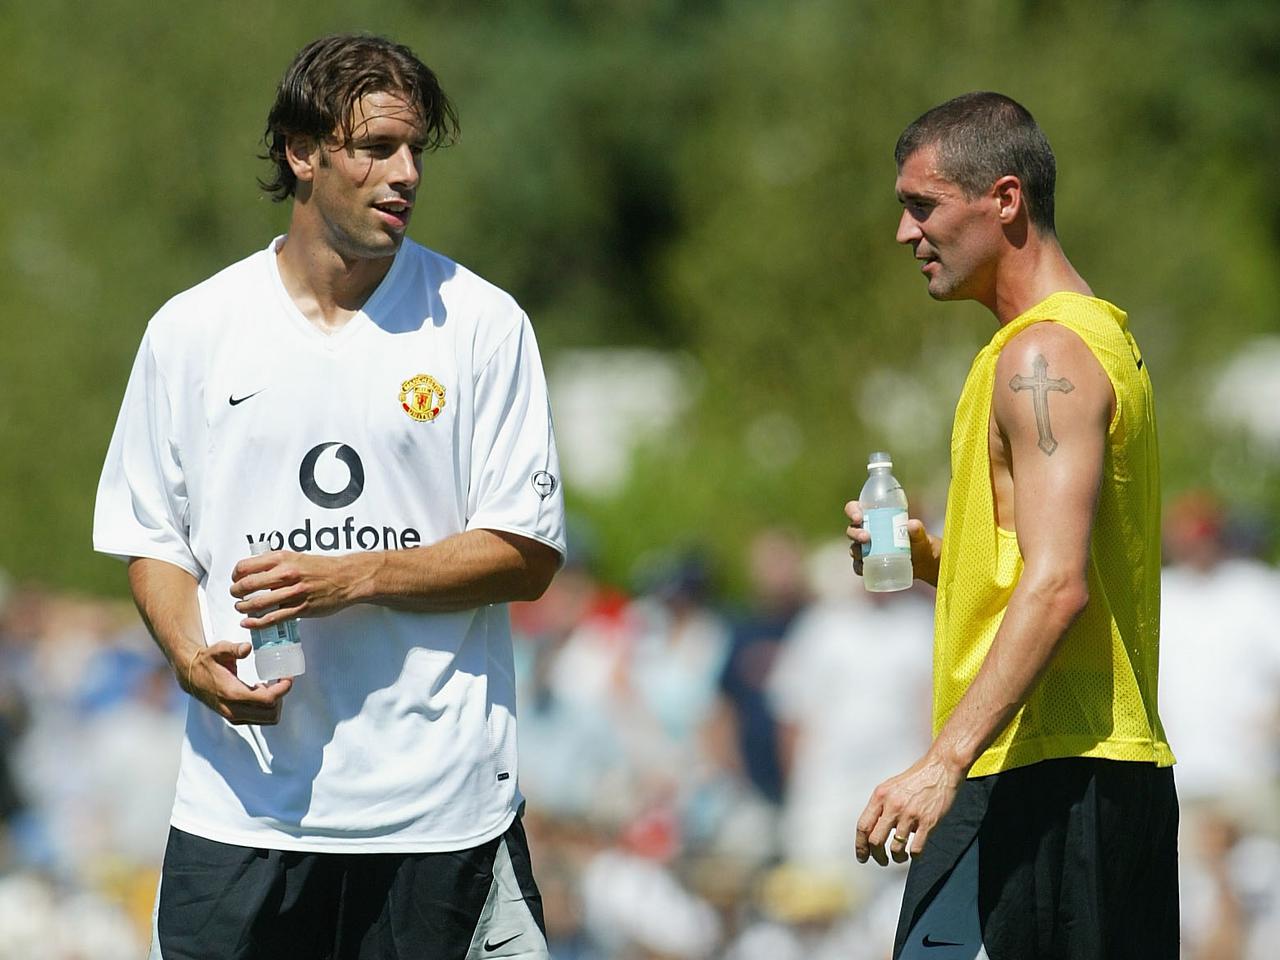 What Roy Keane said to Ruud van Nistelrooy when he signed for Man Utd